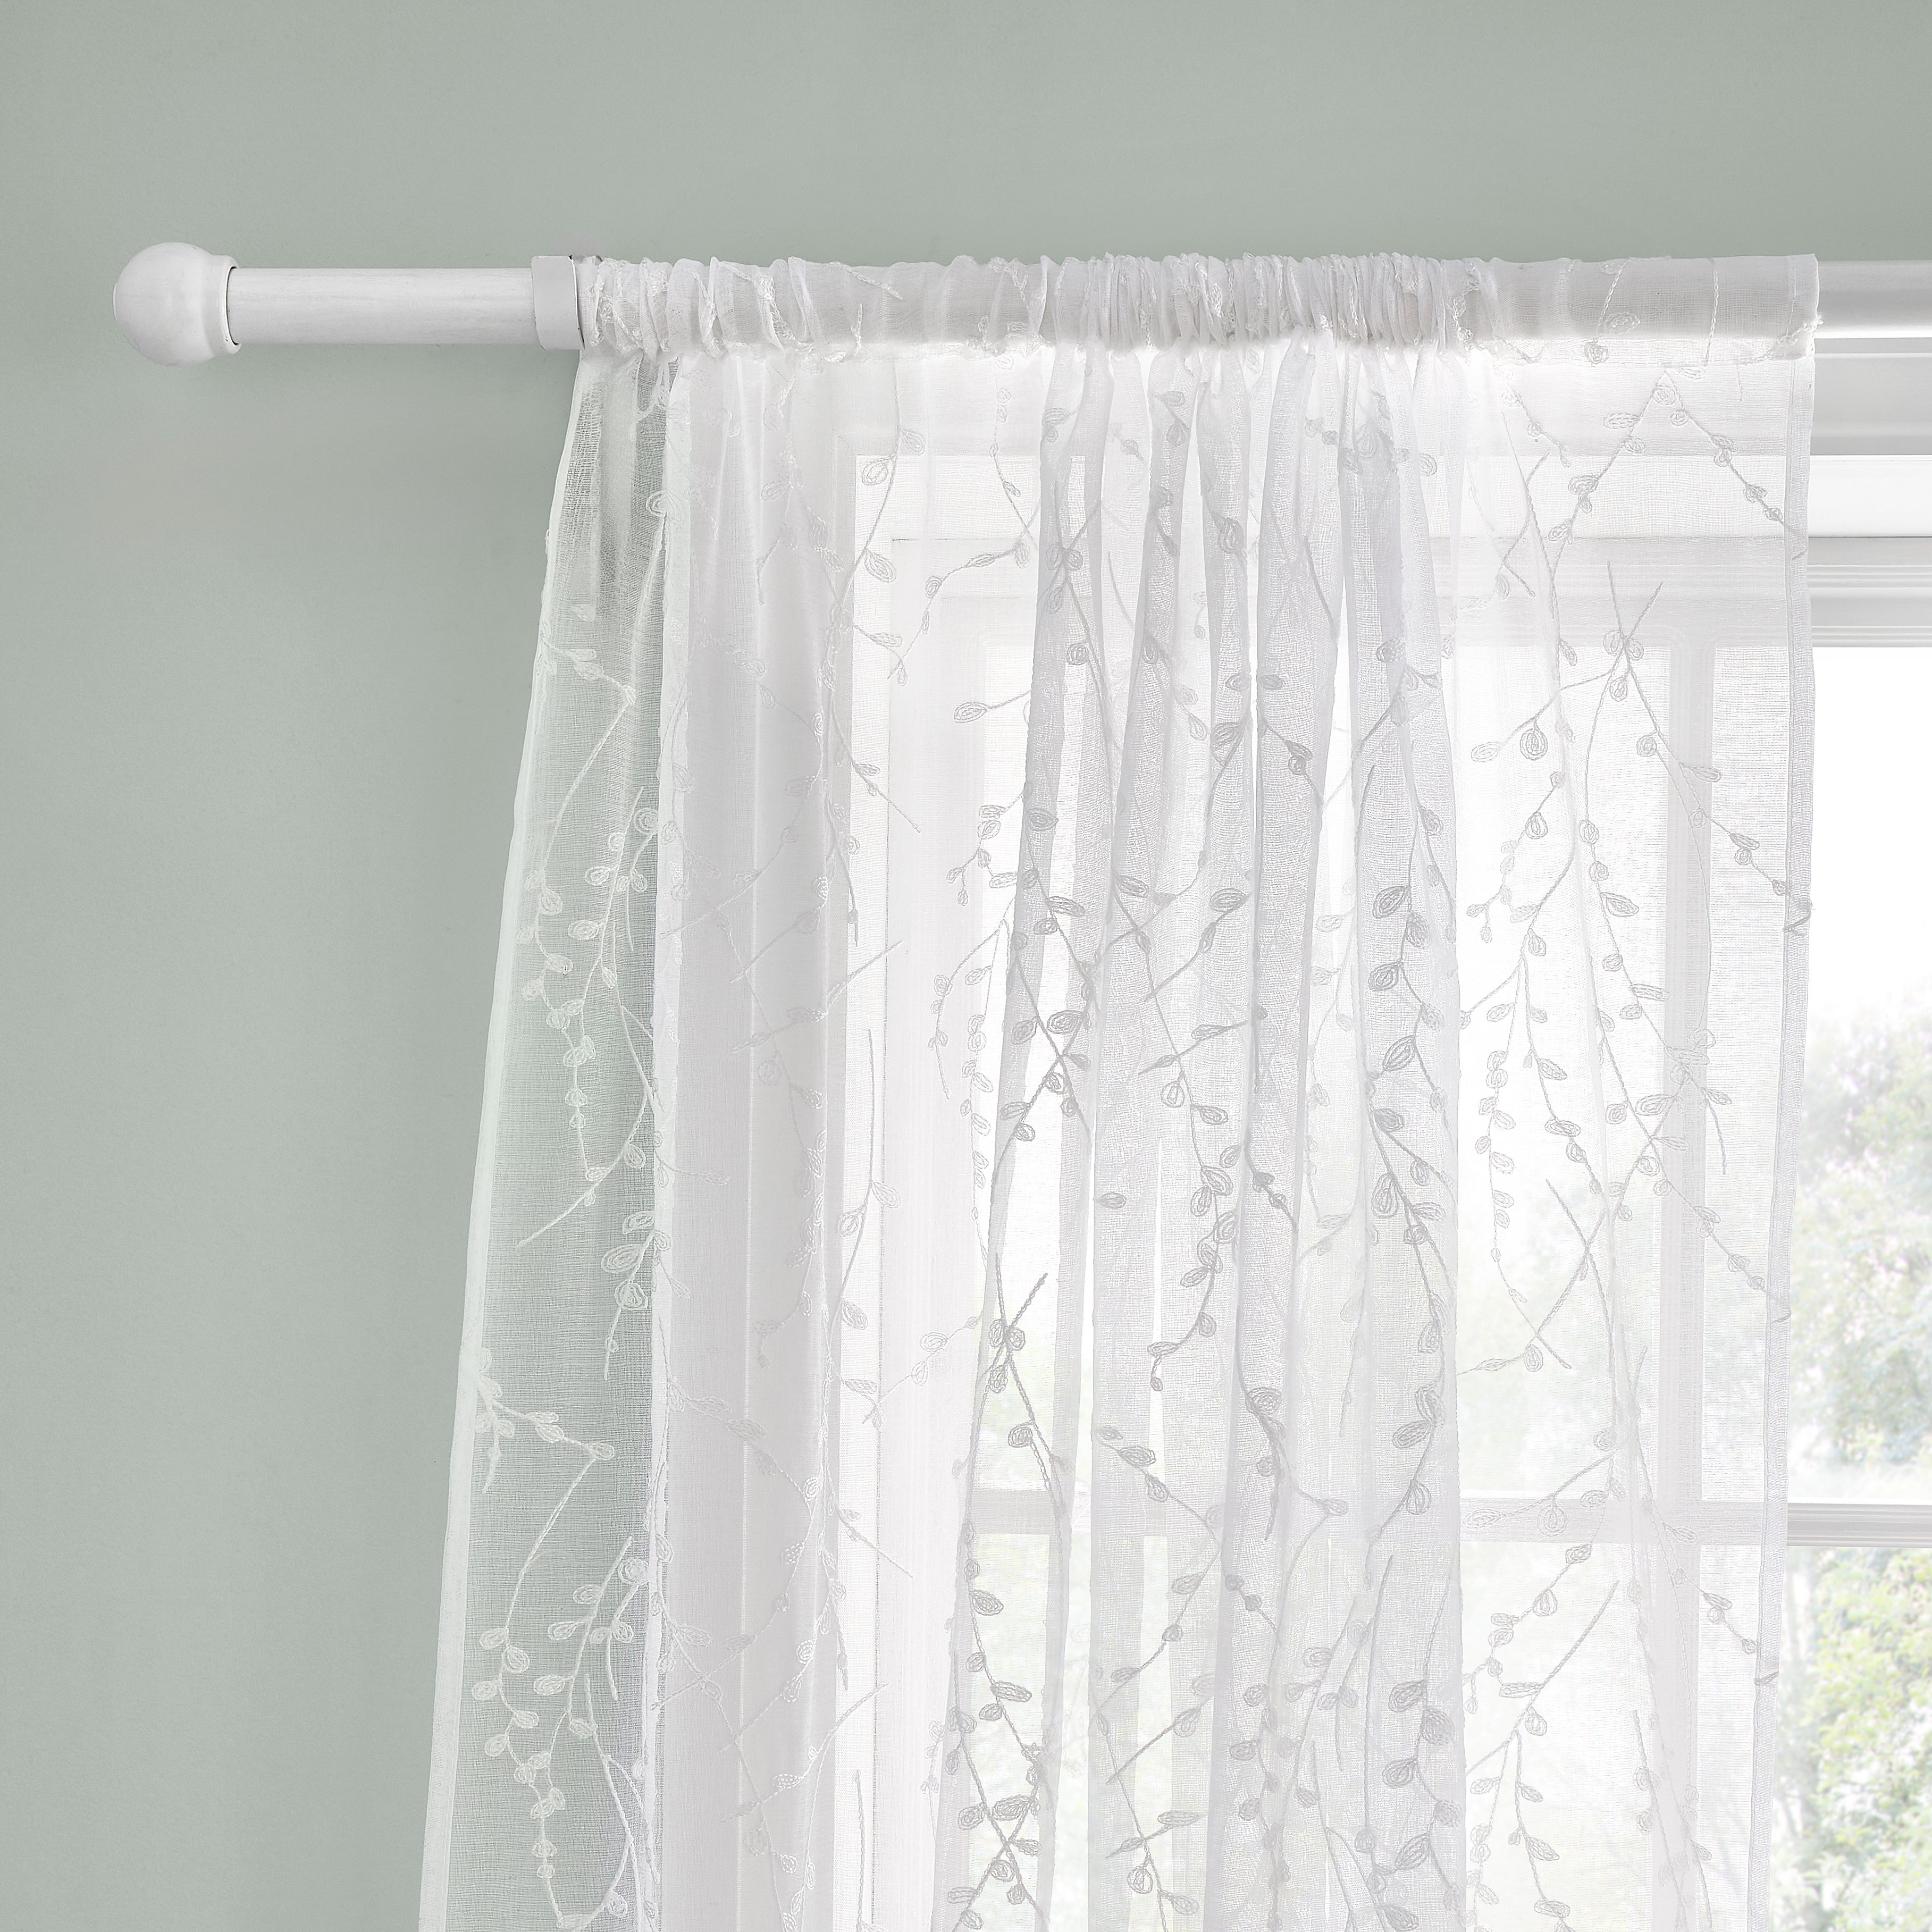 Belle Embroidery Slot Top Curtains